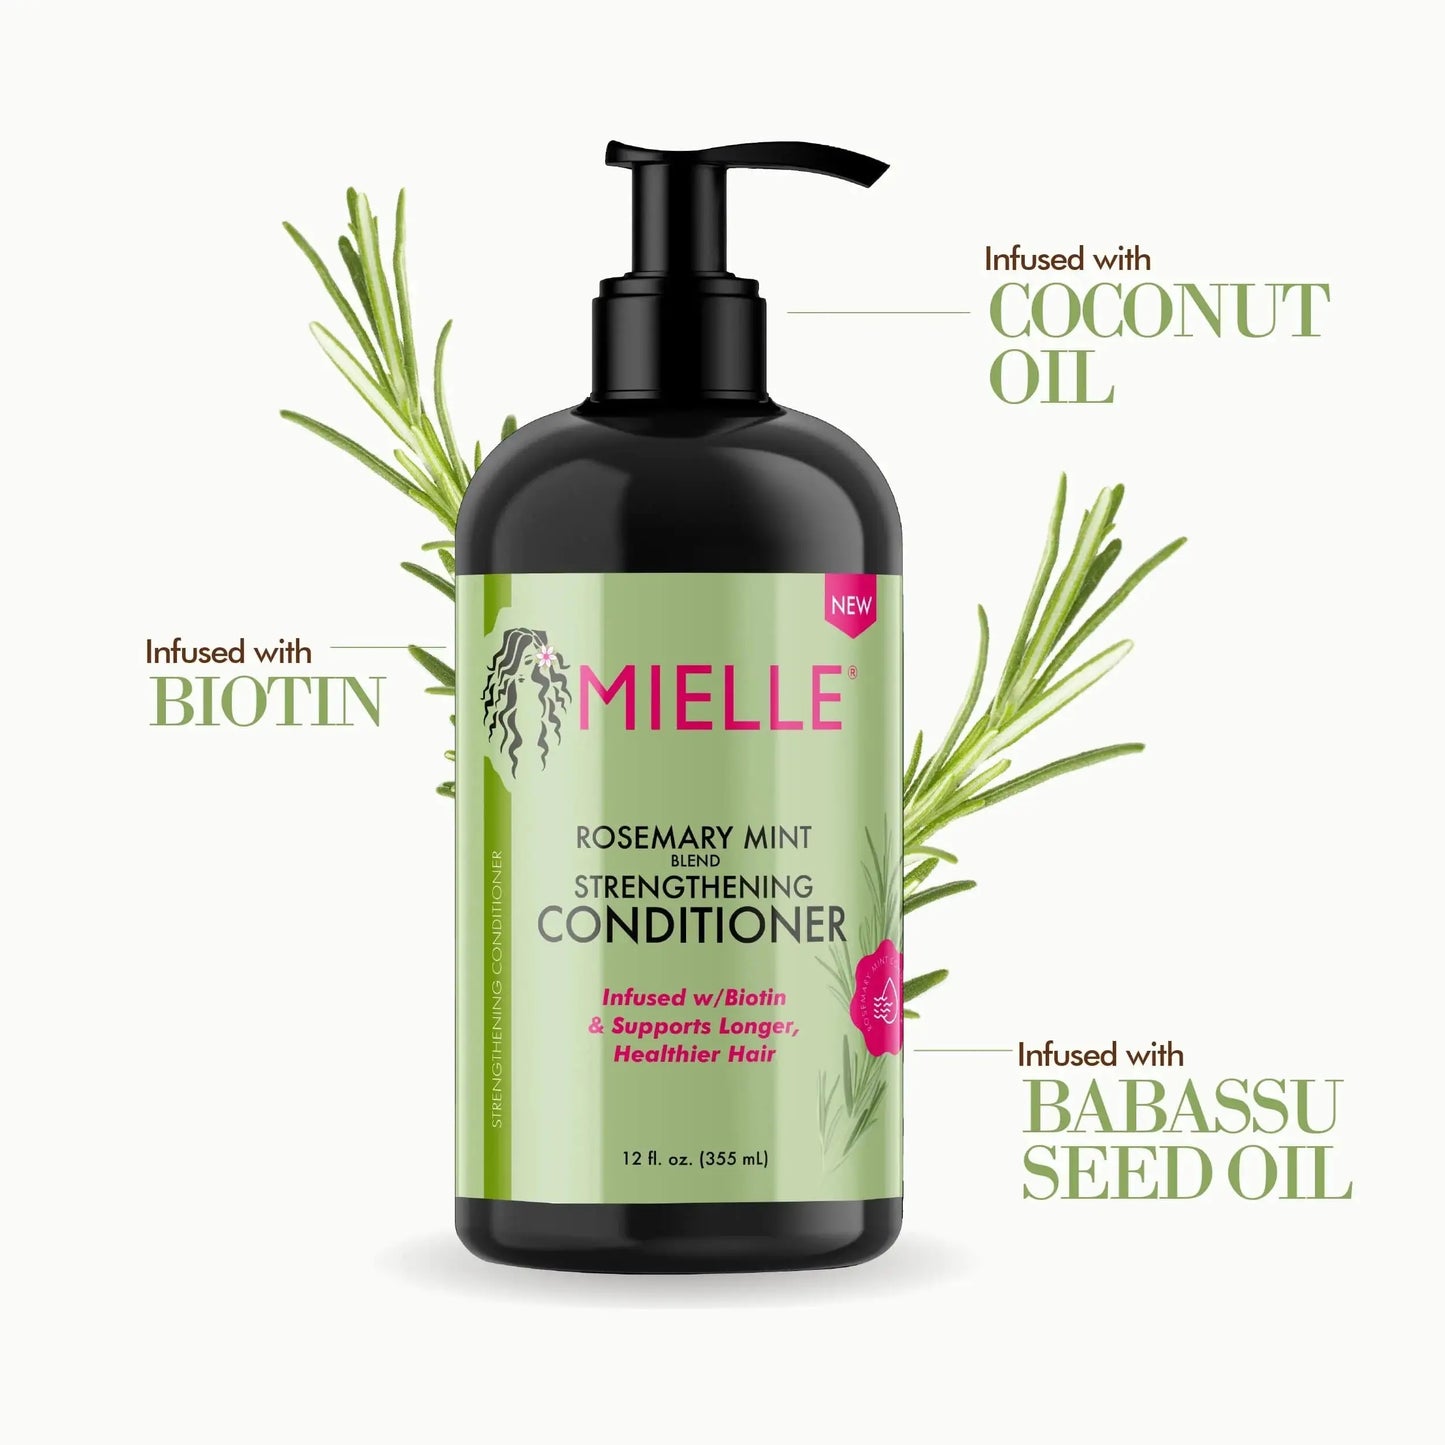 An image of the Mielle Rosemary Mint Leave-In Conditioner wit text overlay